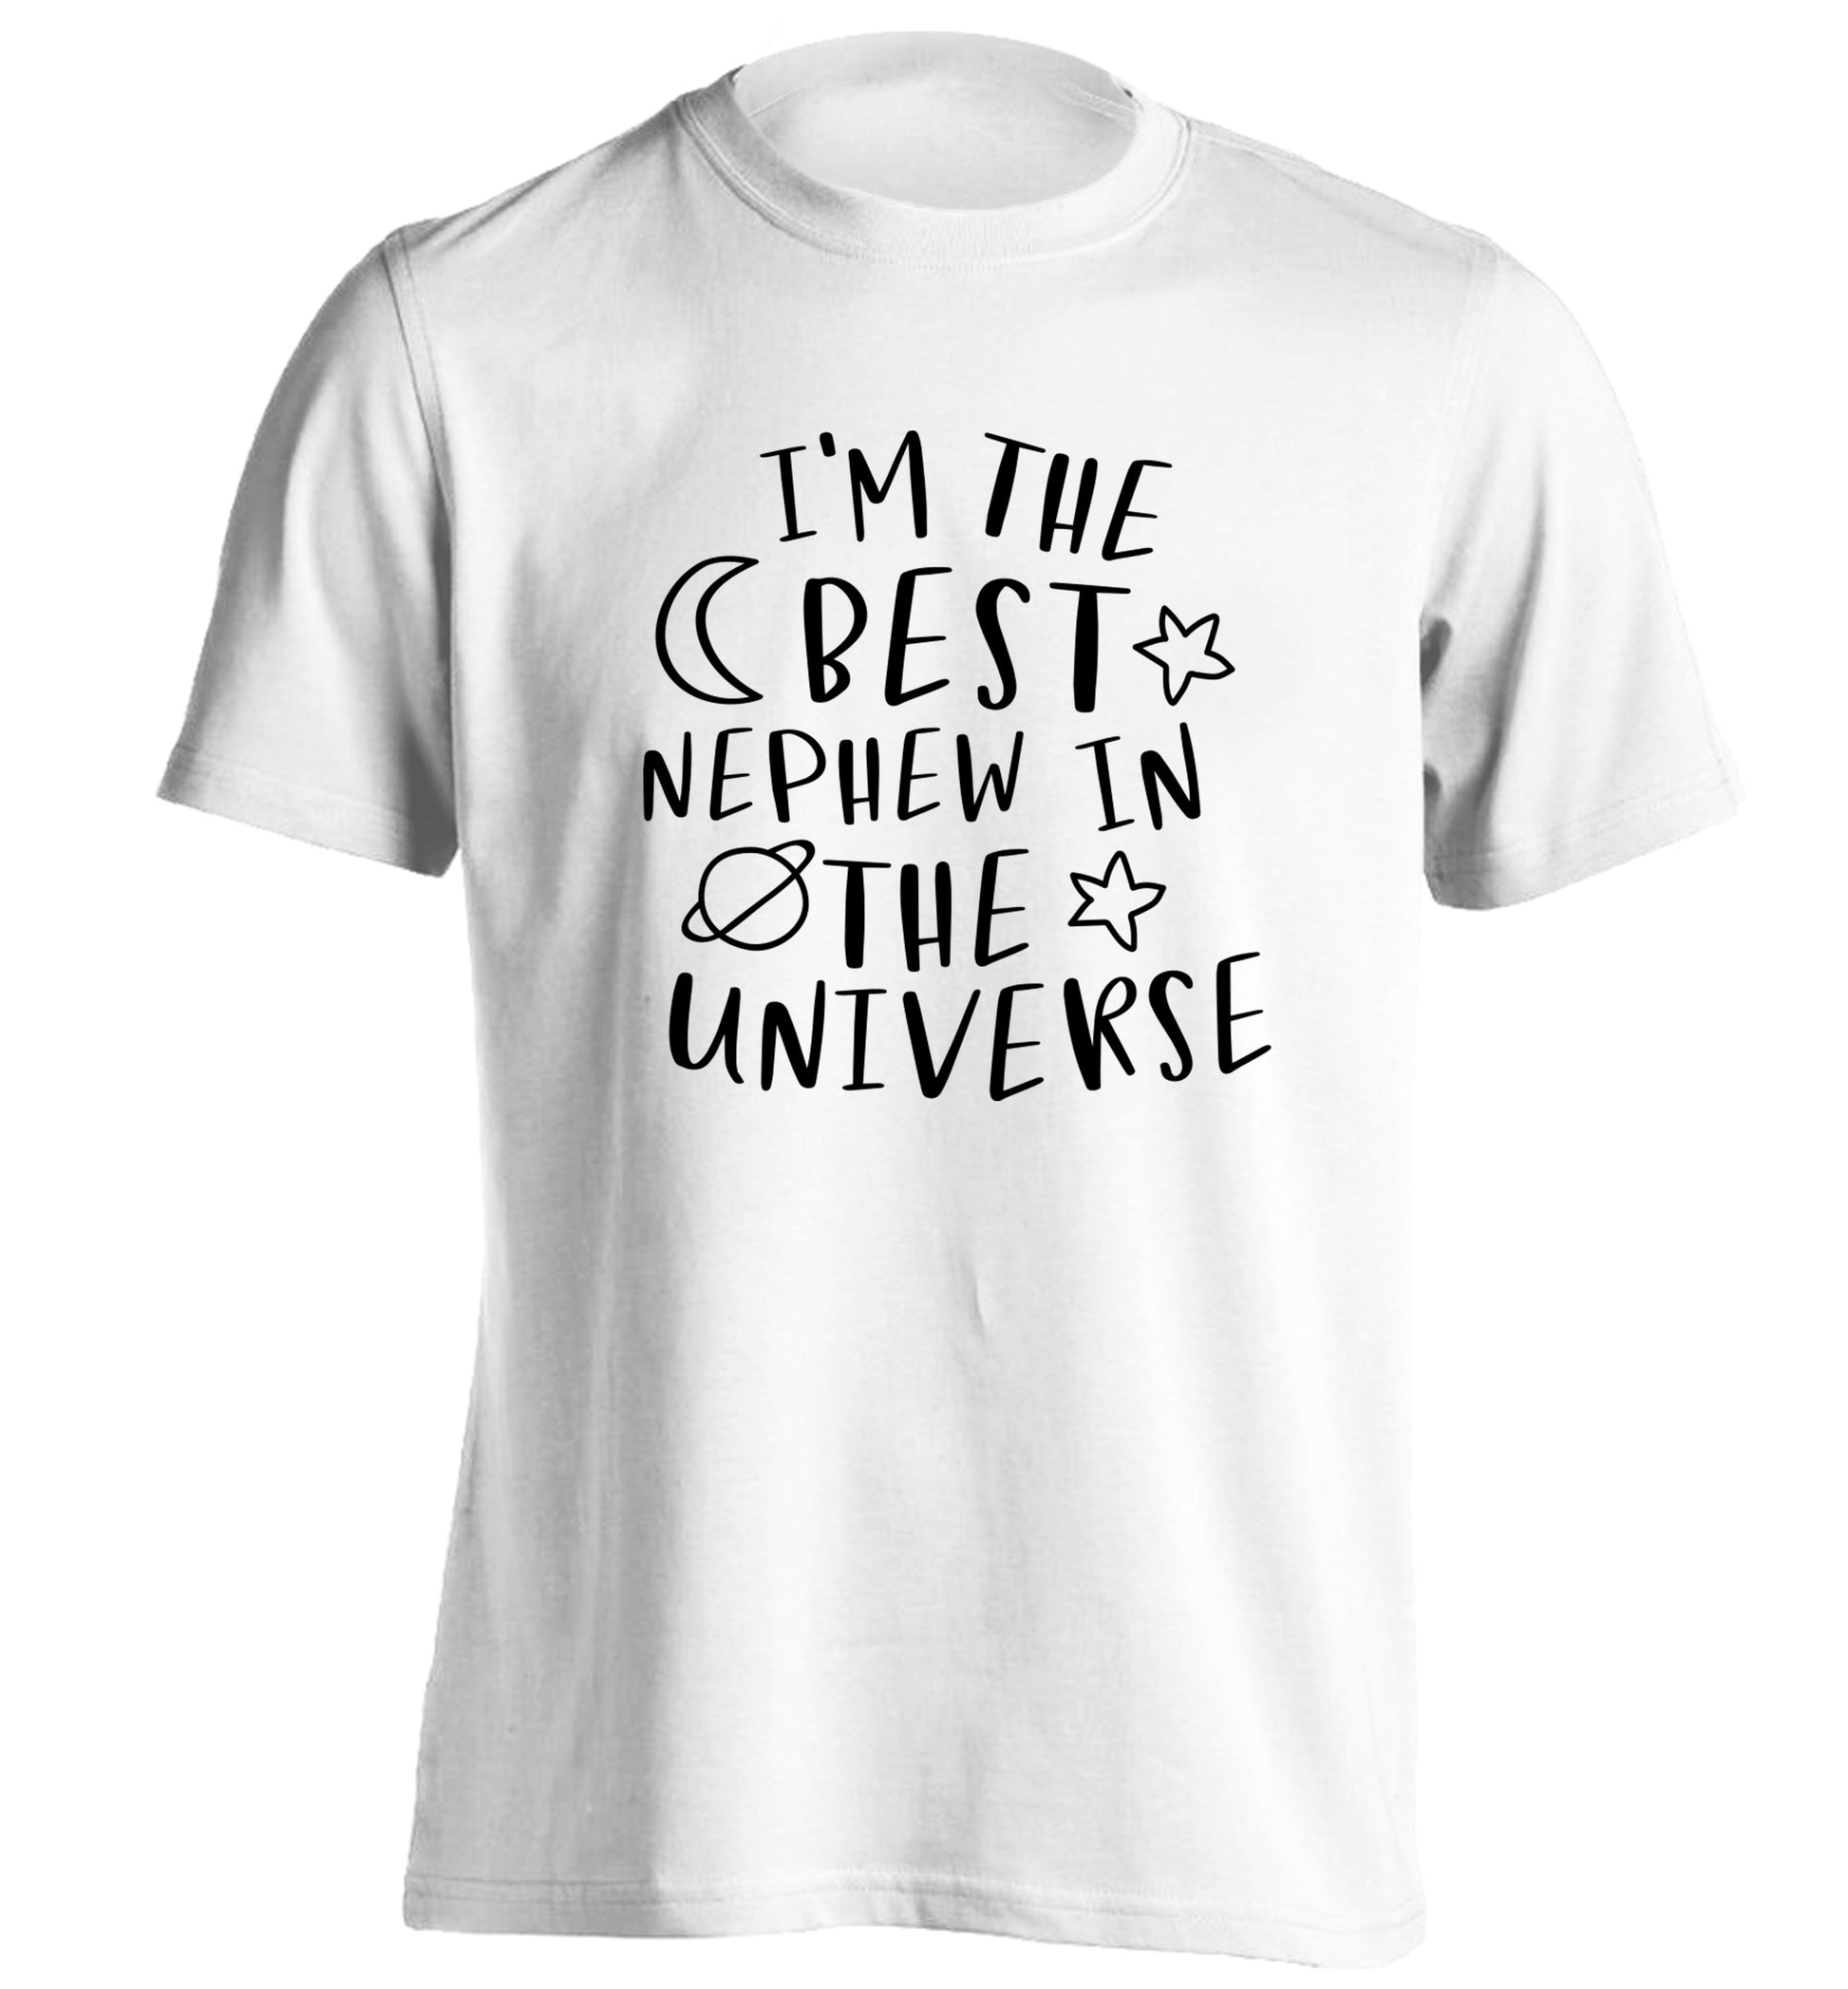 I'm the best nephew in the universe adults unisex white Tshirt 2XL